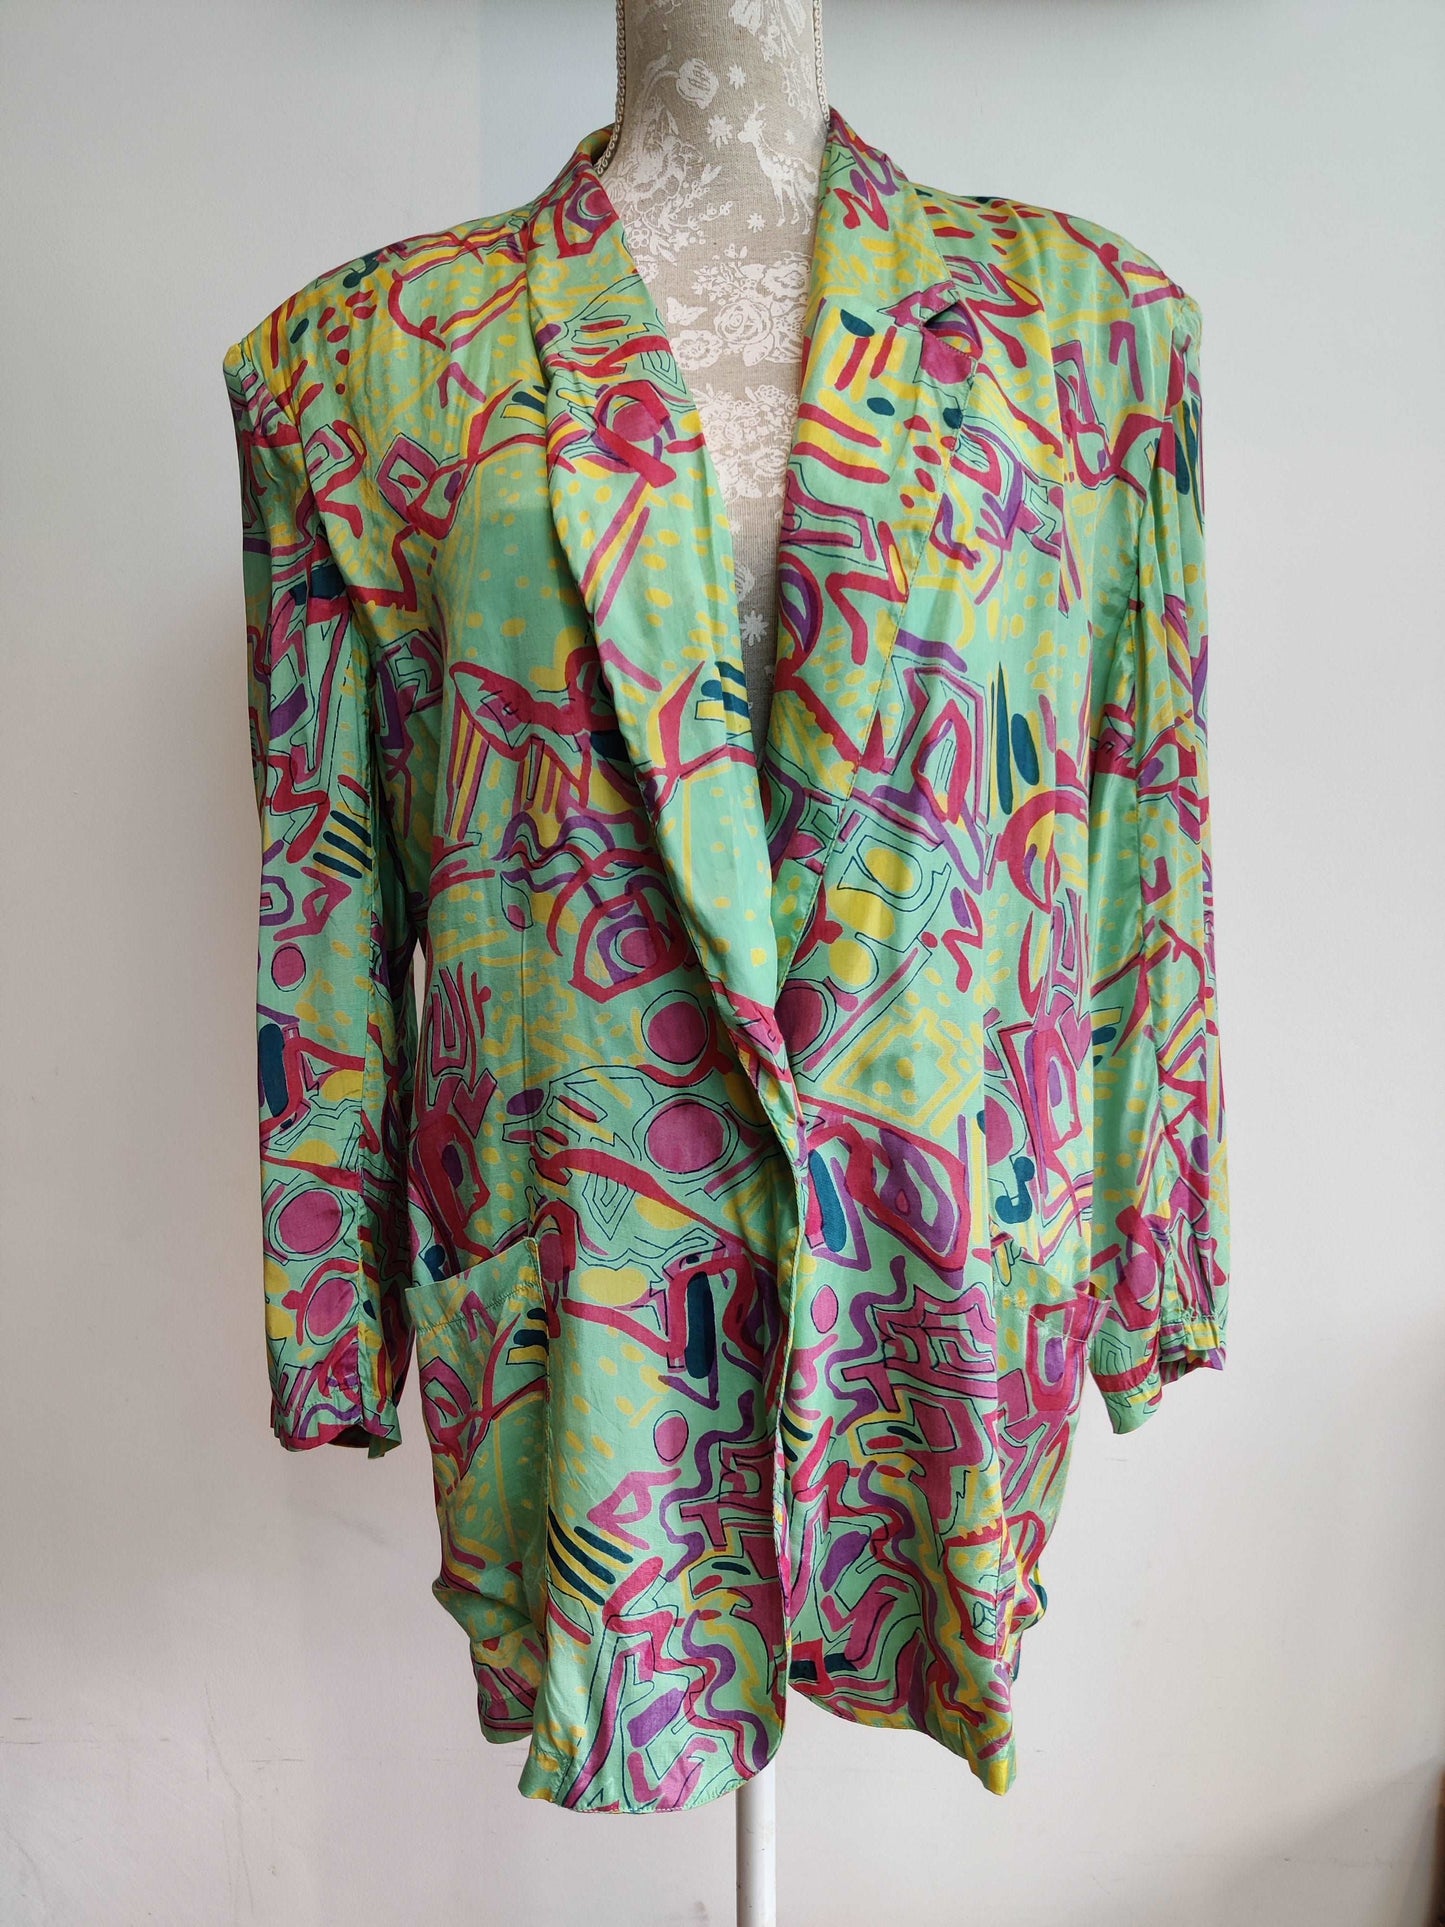 80s French connection abstract print blazer.